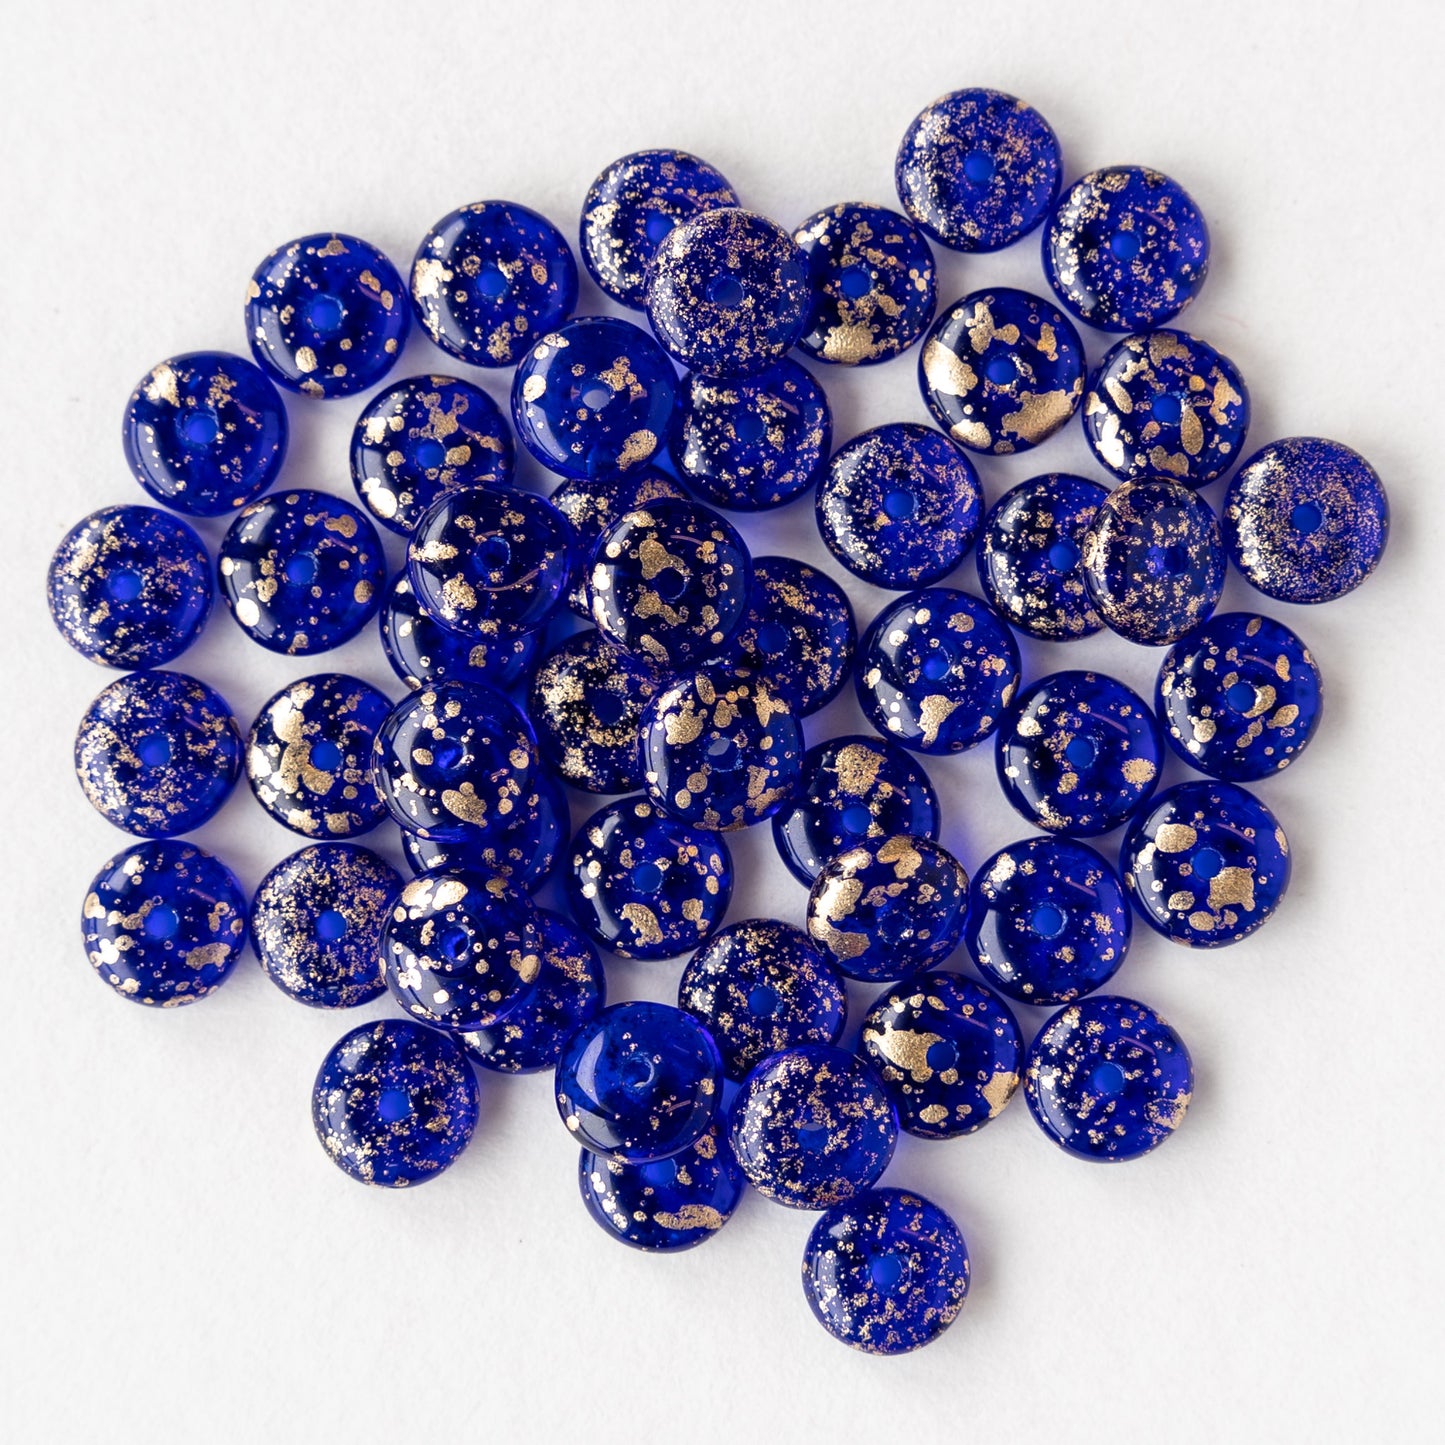 6mm Rondelle Beads - Cobalt Blue with Gold Dust - 50 Beads